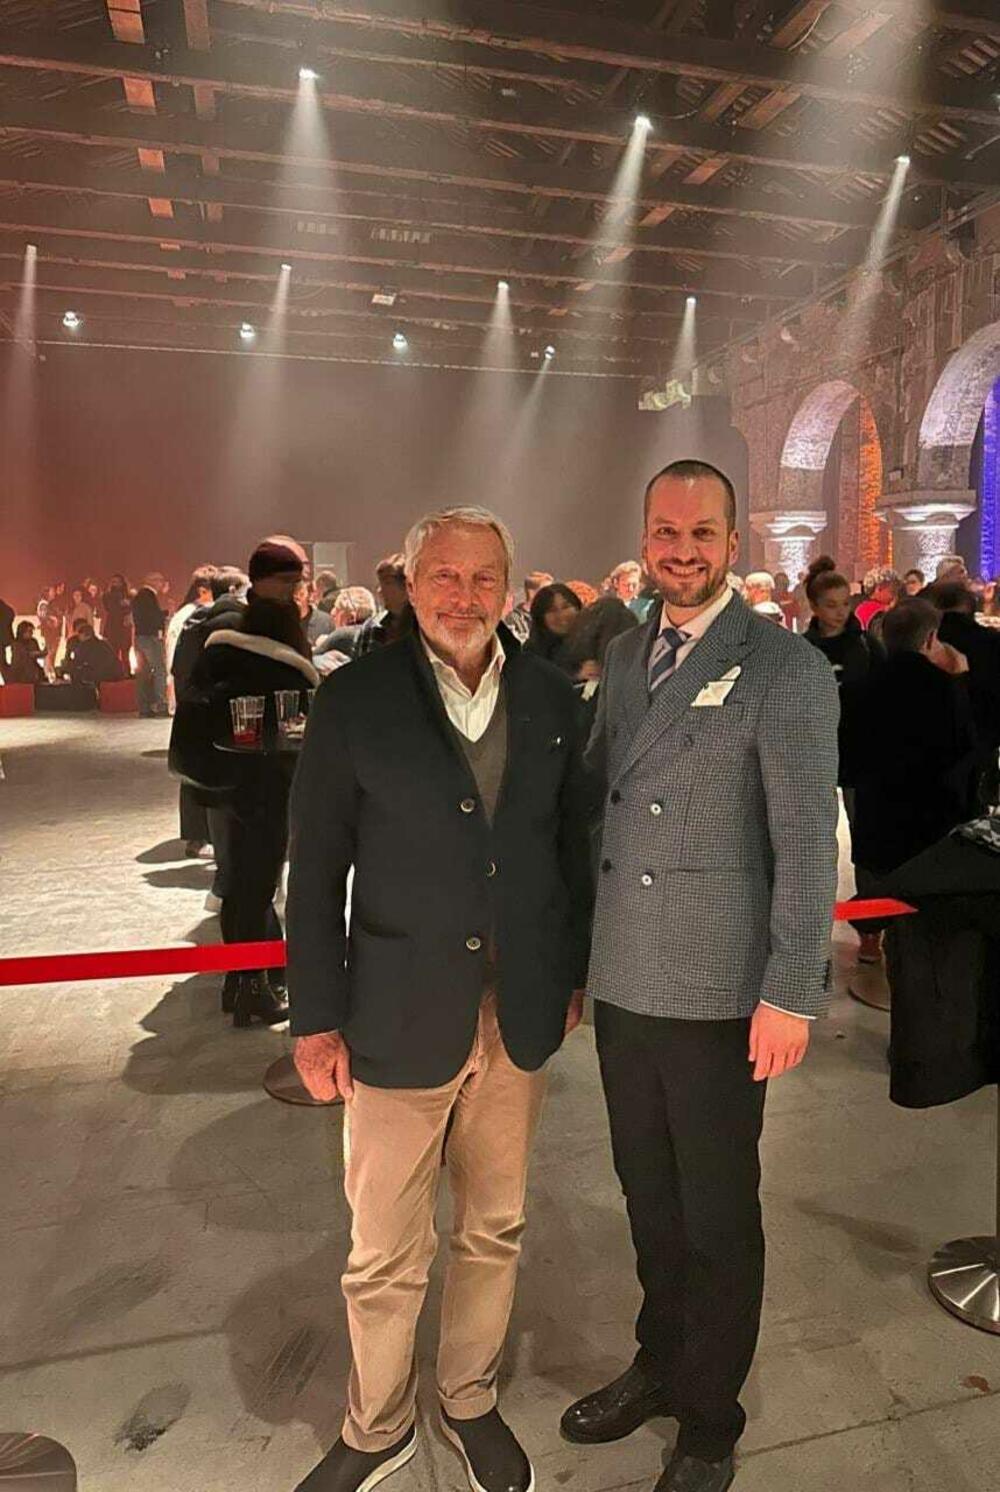 Roberto Ćikuto, President of the Biennale in Venice, and Janko Odović, Minister of Spatial Planning, Urbanism and State Property - in Venice